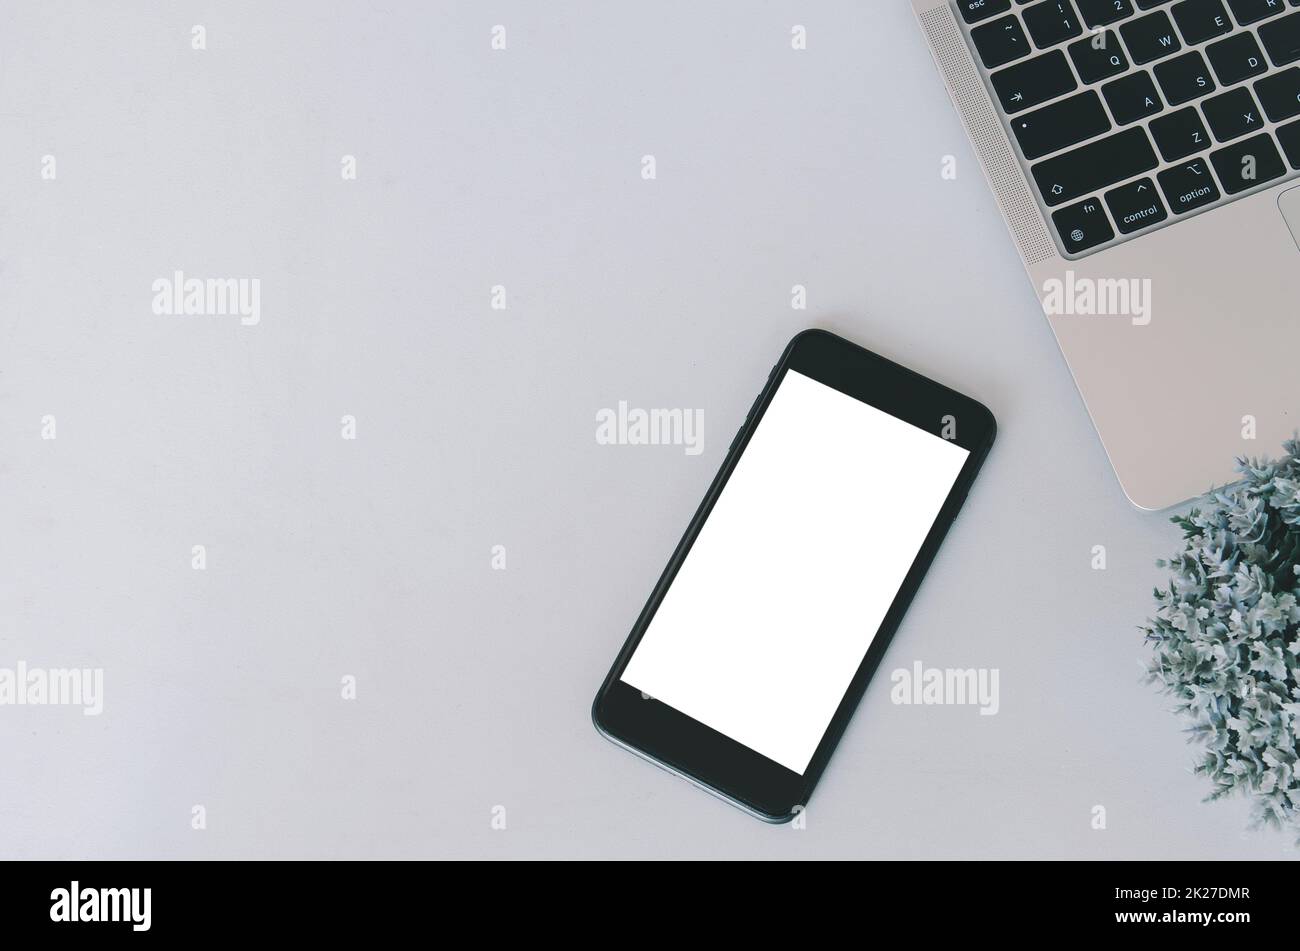 Mockup a mobile phone and computer laptop. Blank screen with text or image for an advertisement. Stock Photo